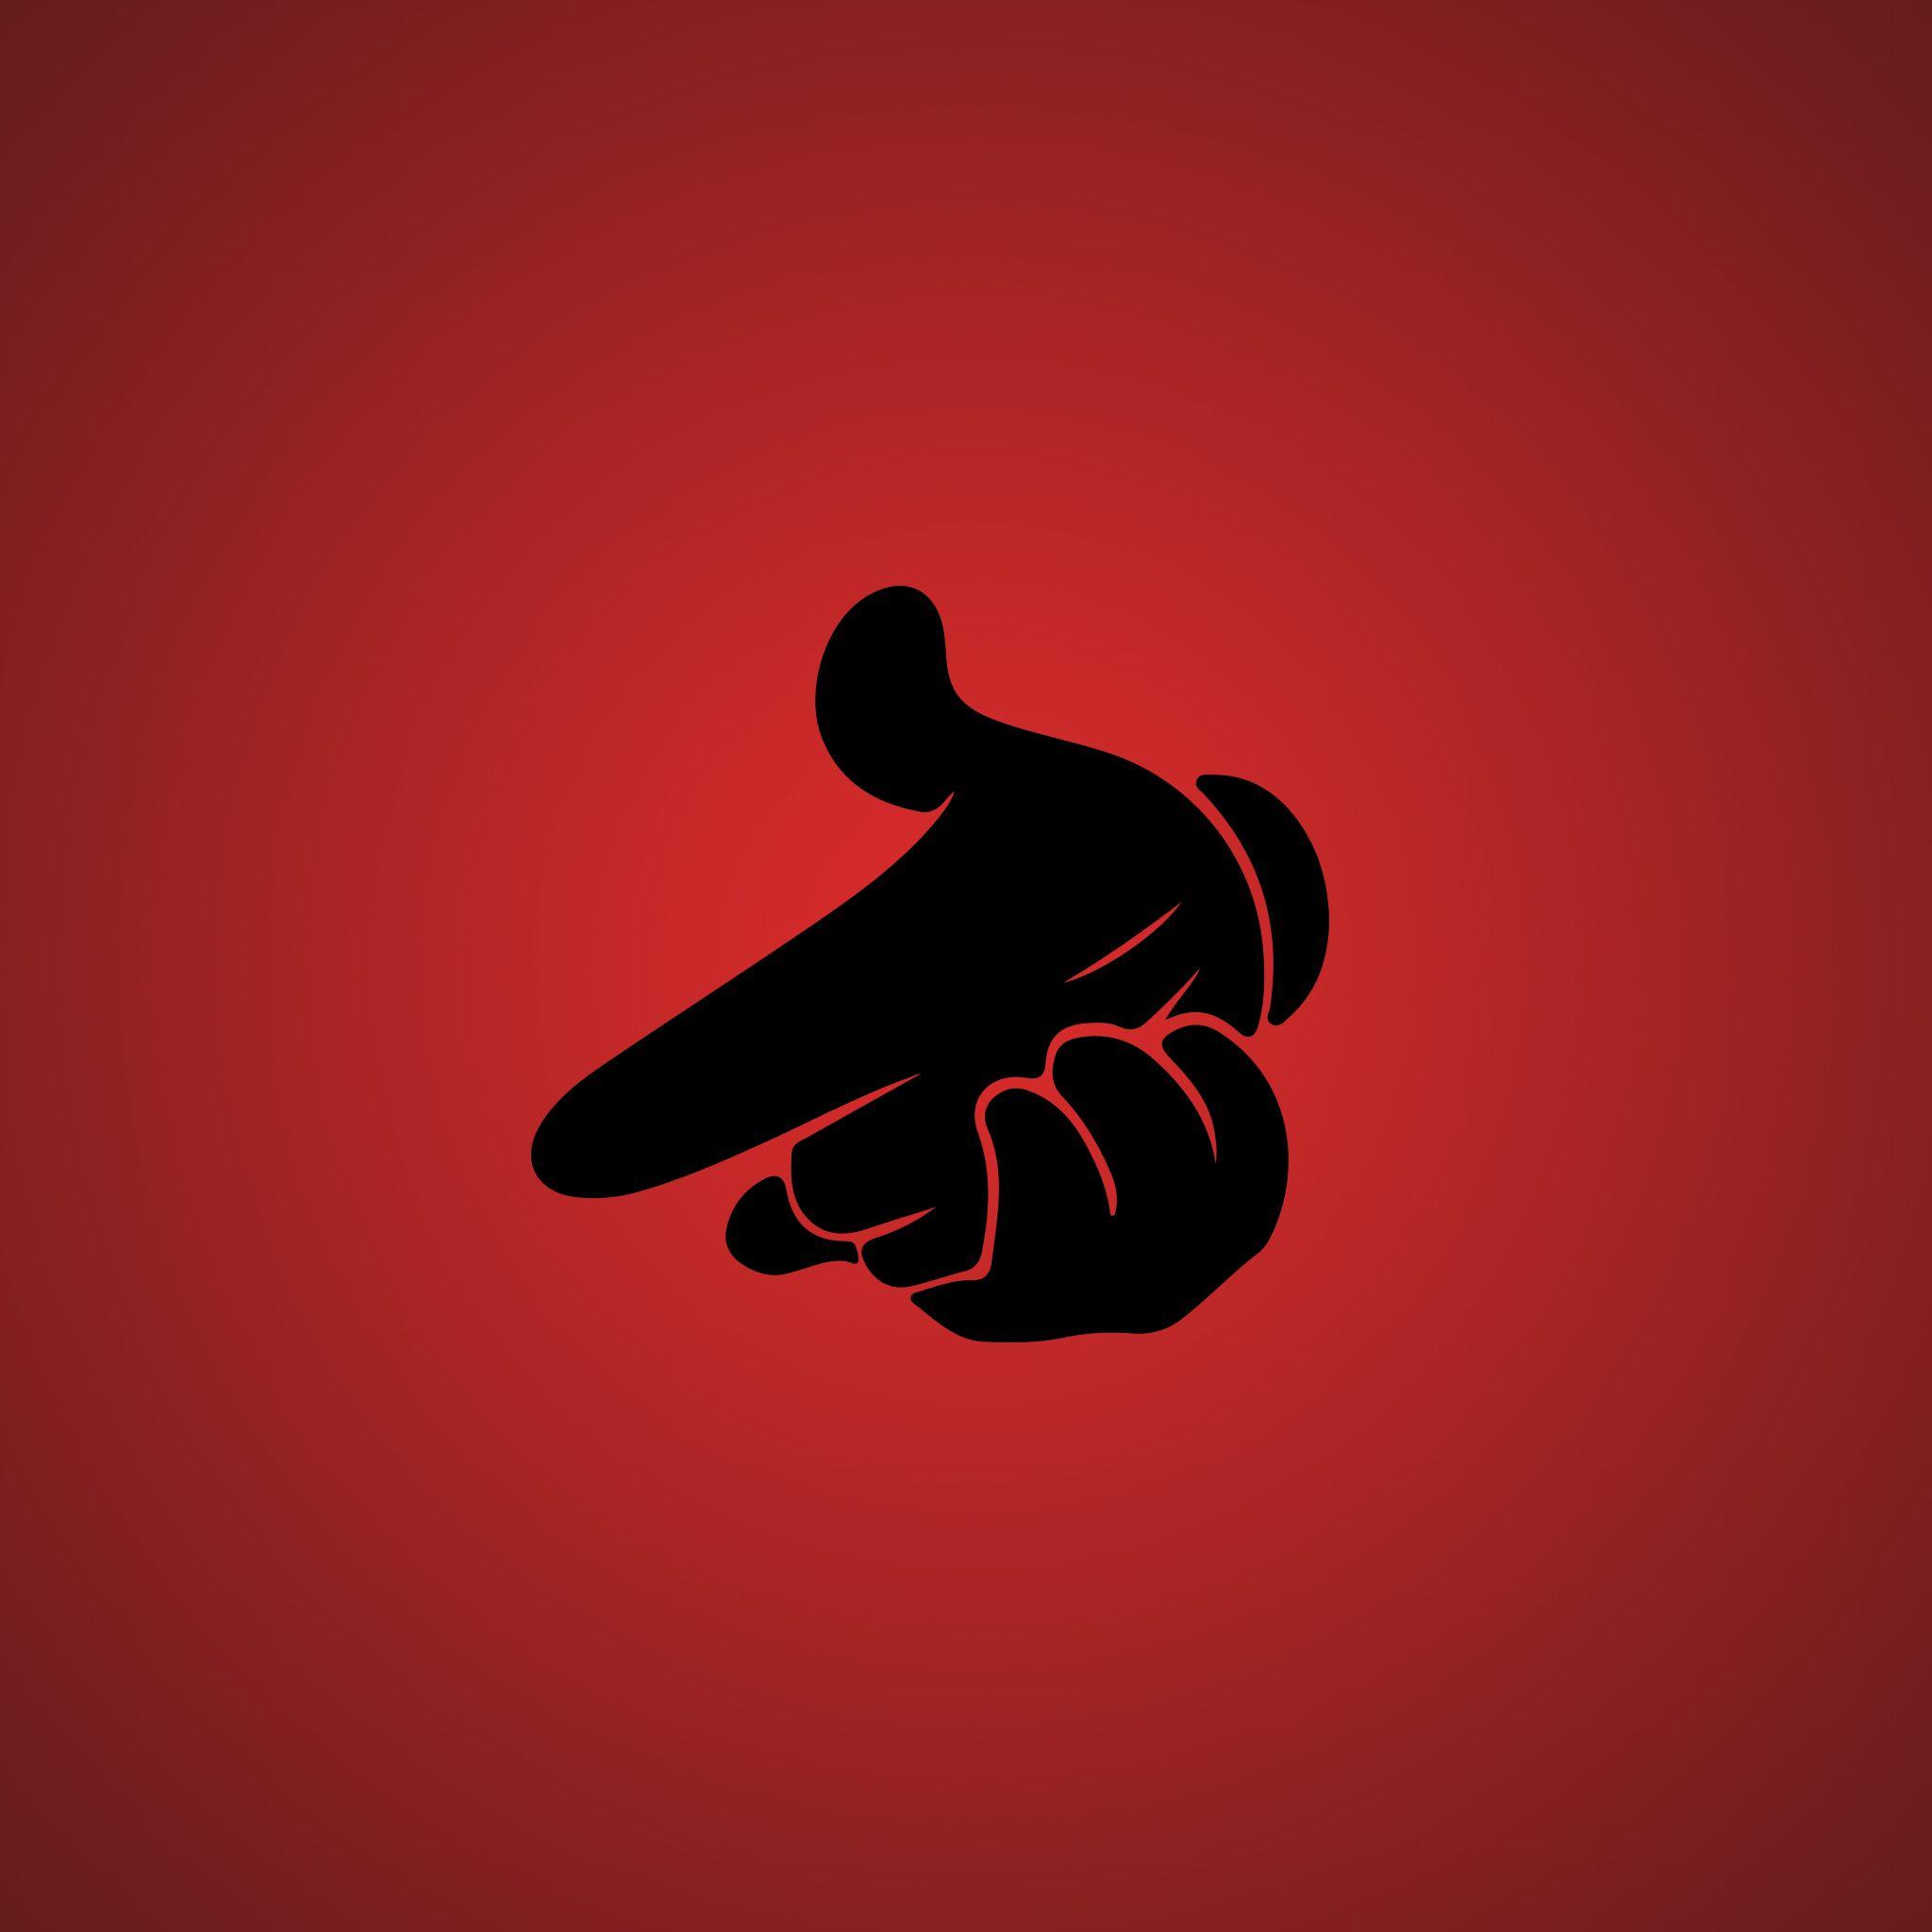 Red Crooks and Castles Logo - Crooks And Castles Wallpapers - Wallpaper Cave